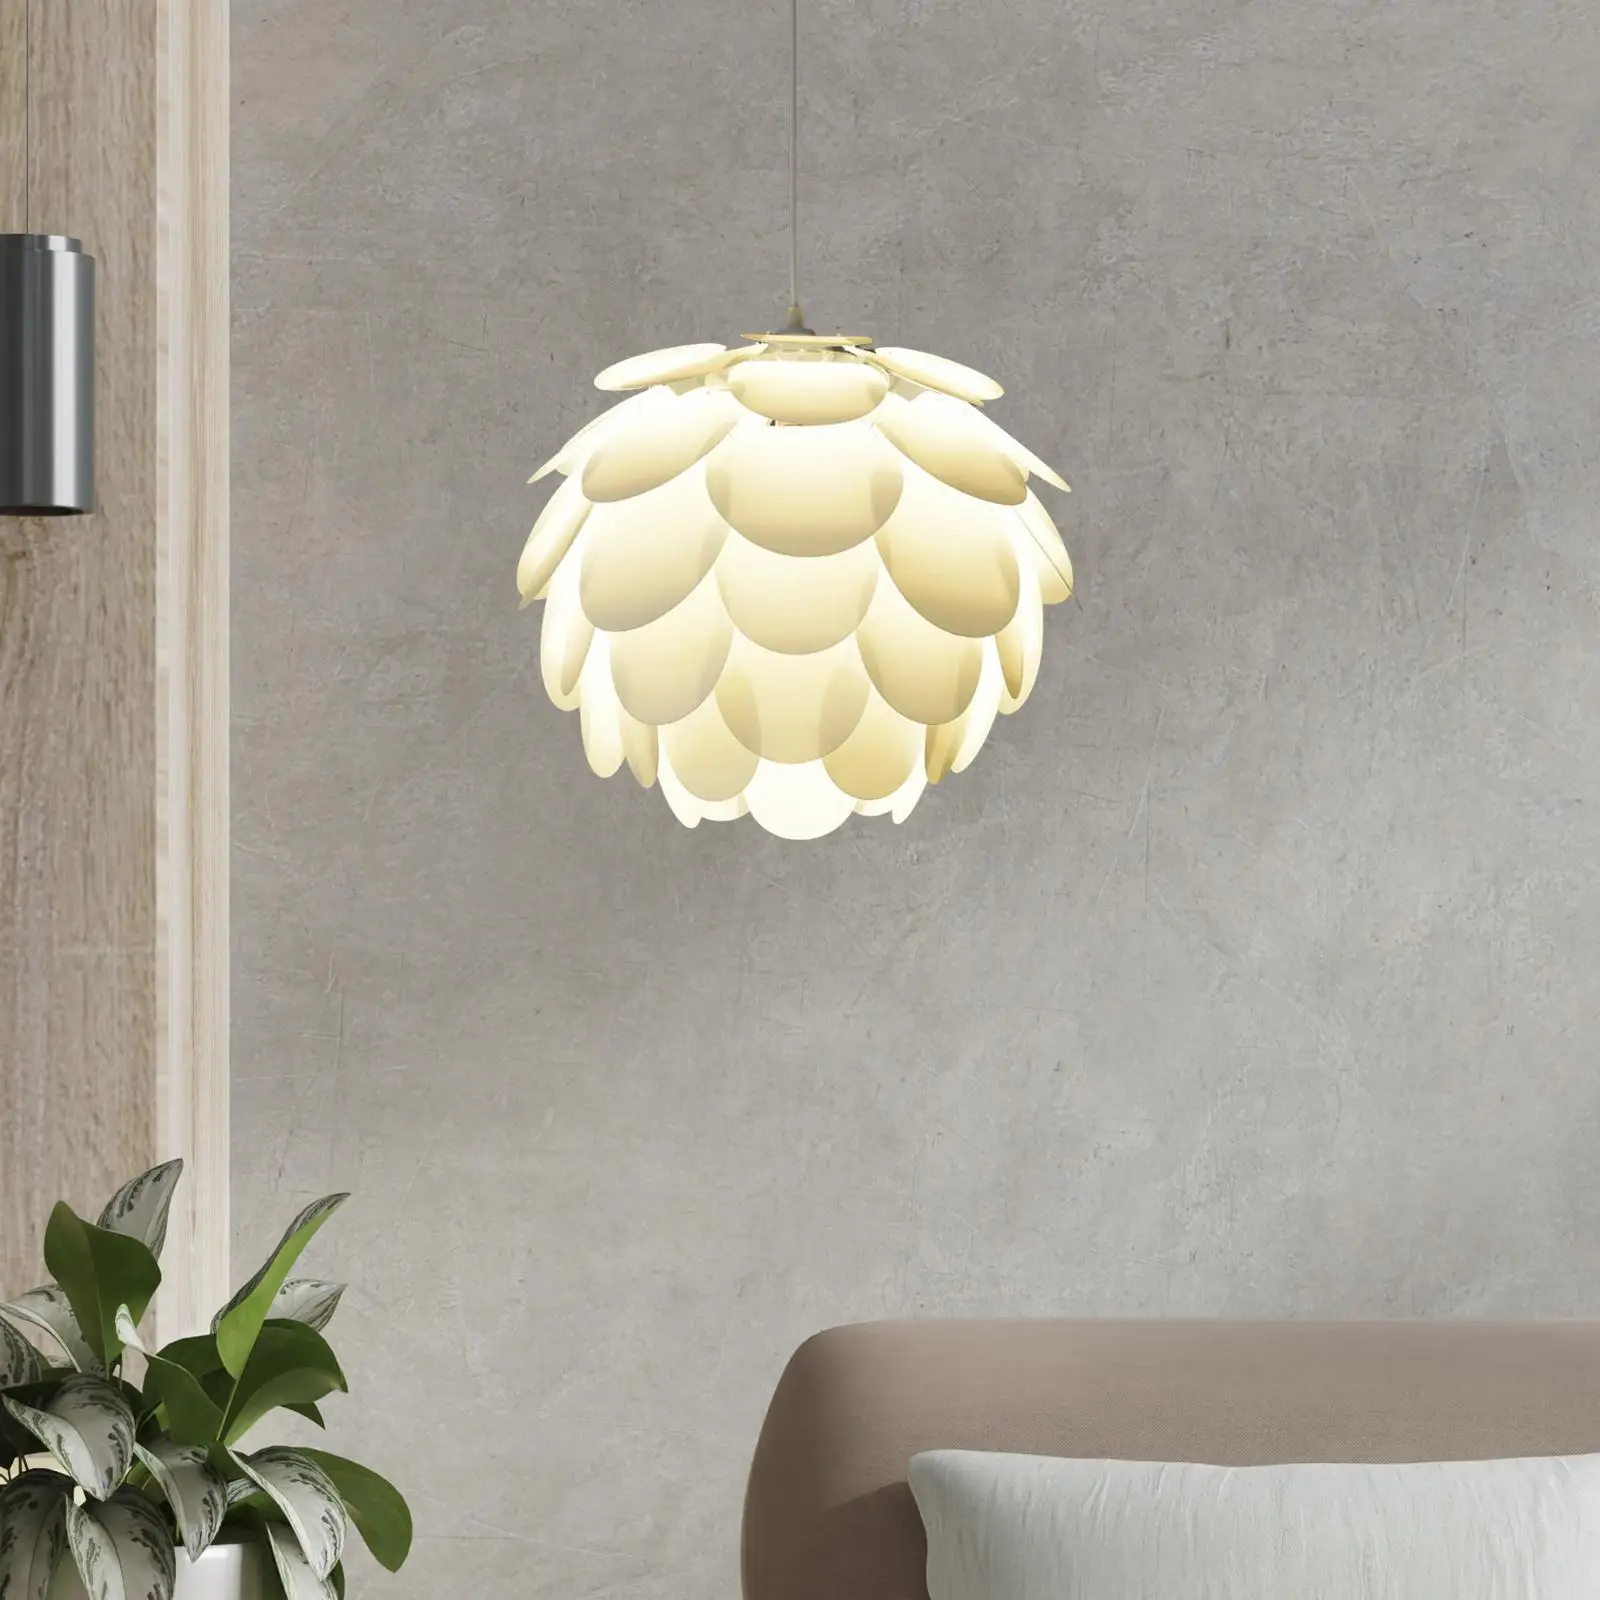 Creative Lampshade Light Fixture Cover Chandelier Simple Replacement Crafts for Coffee Shop Library Office Kitchen Decoration